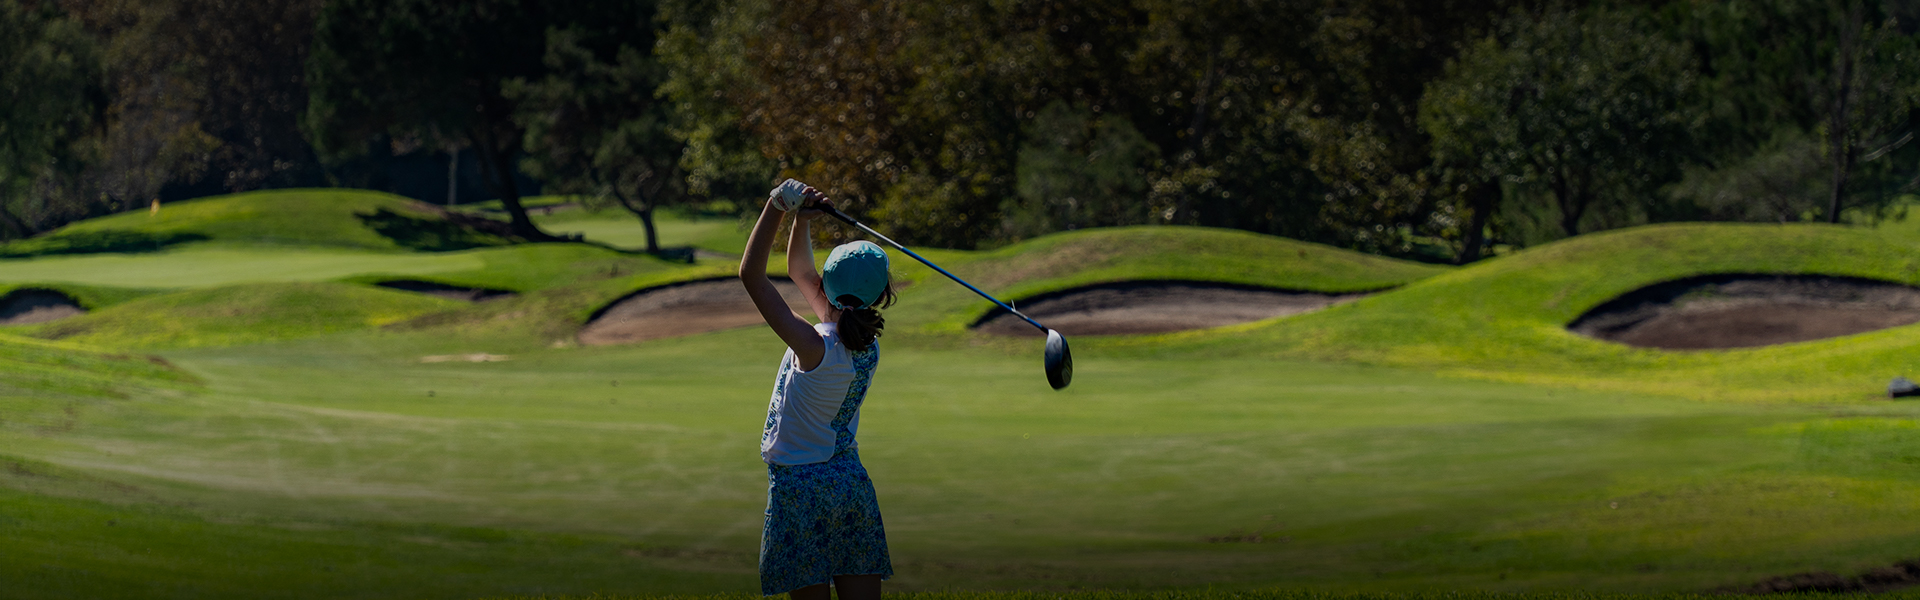 a young girl wearing a blue and white outfit while playing golf on the course